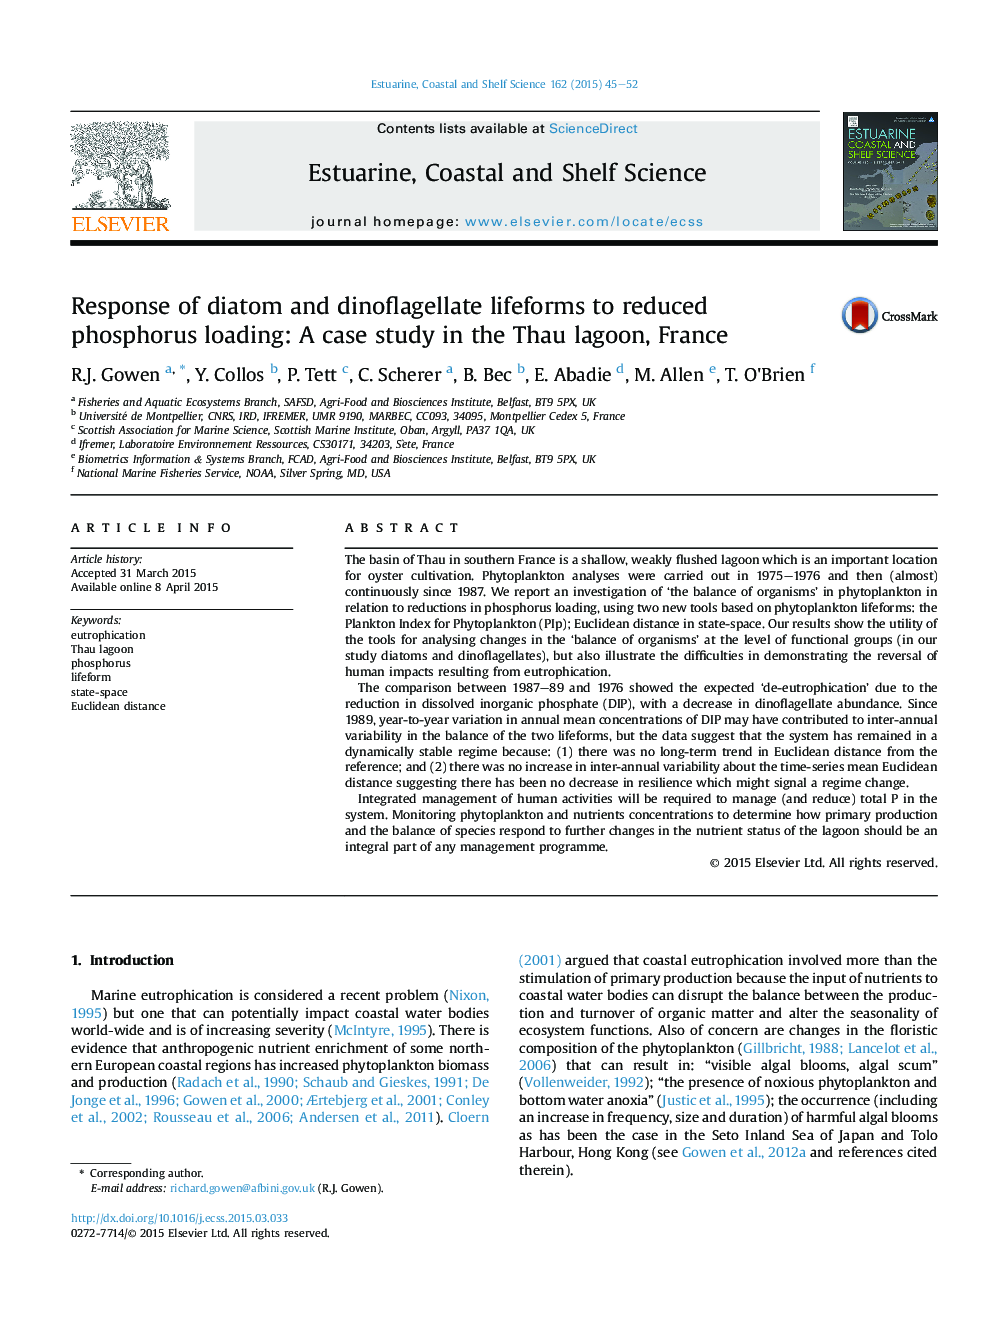 Response of diatom and dinoflagellate lifeforms to reduced phosphorus loading: A case study in the Thau lagoon, France